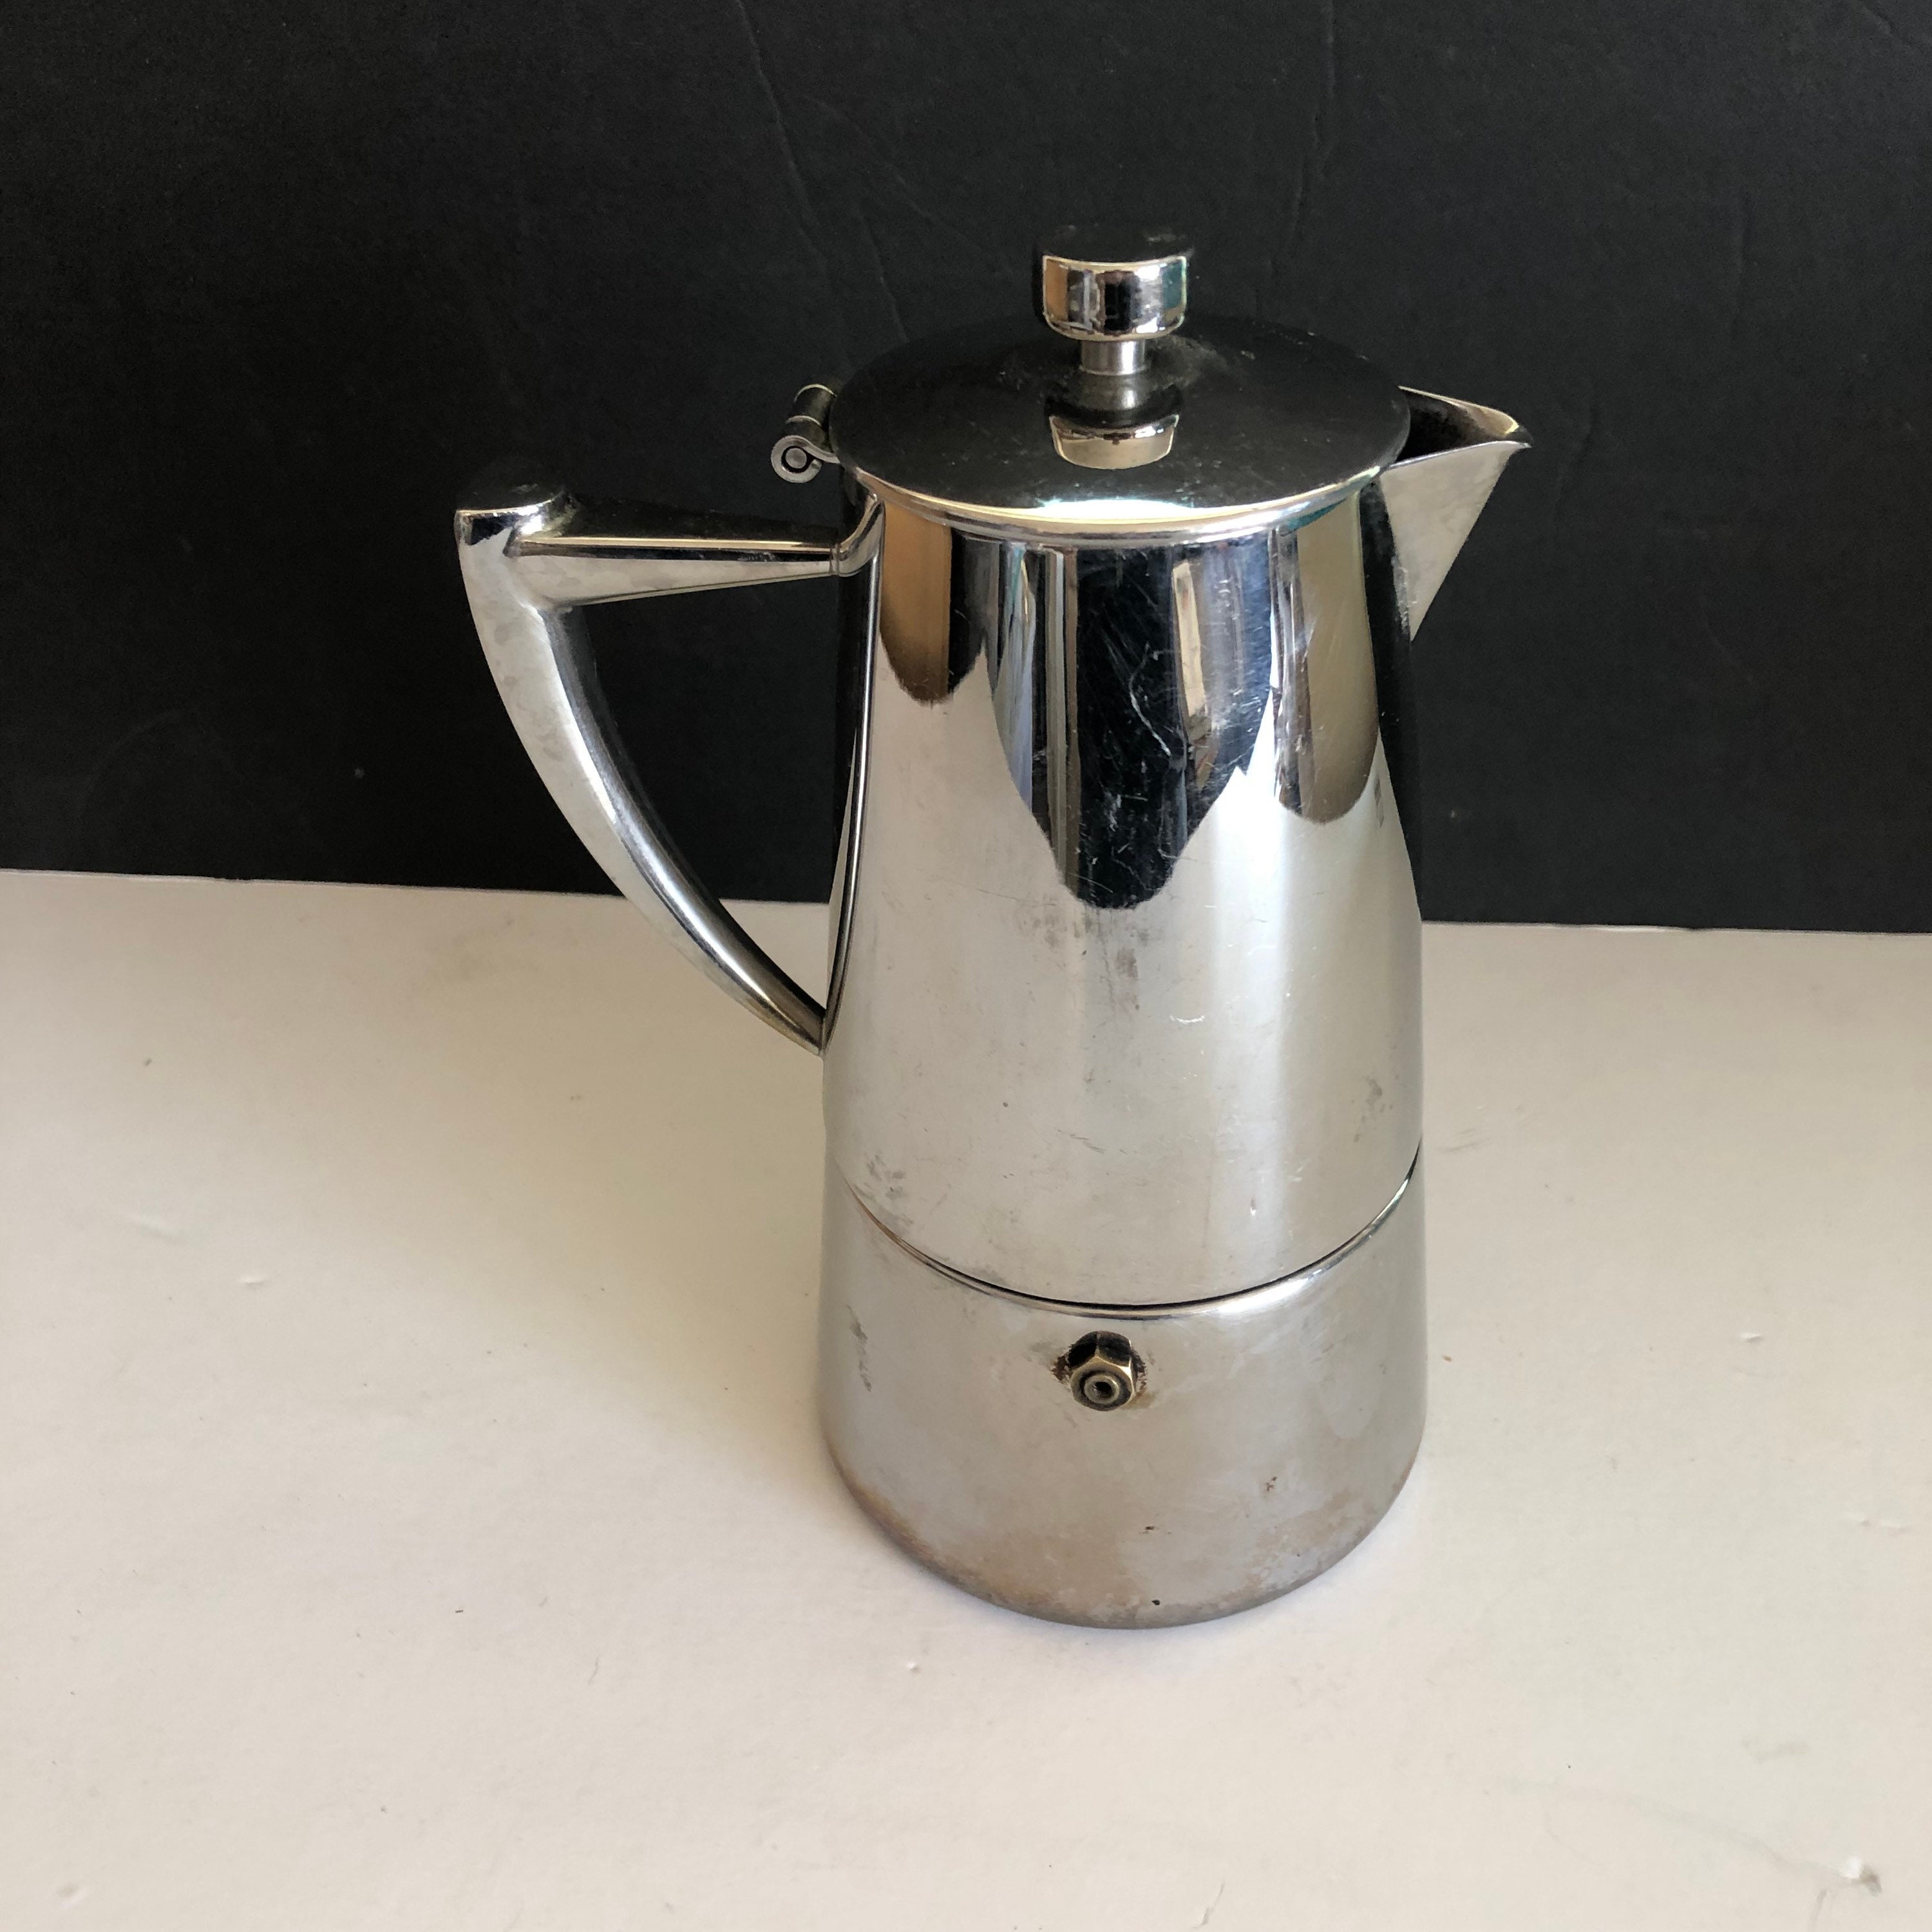 Cuisinox Roma 4 Cup Stainless Steel Stovetop Moka Espresso Maker